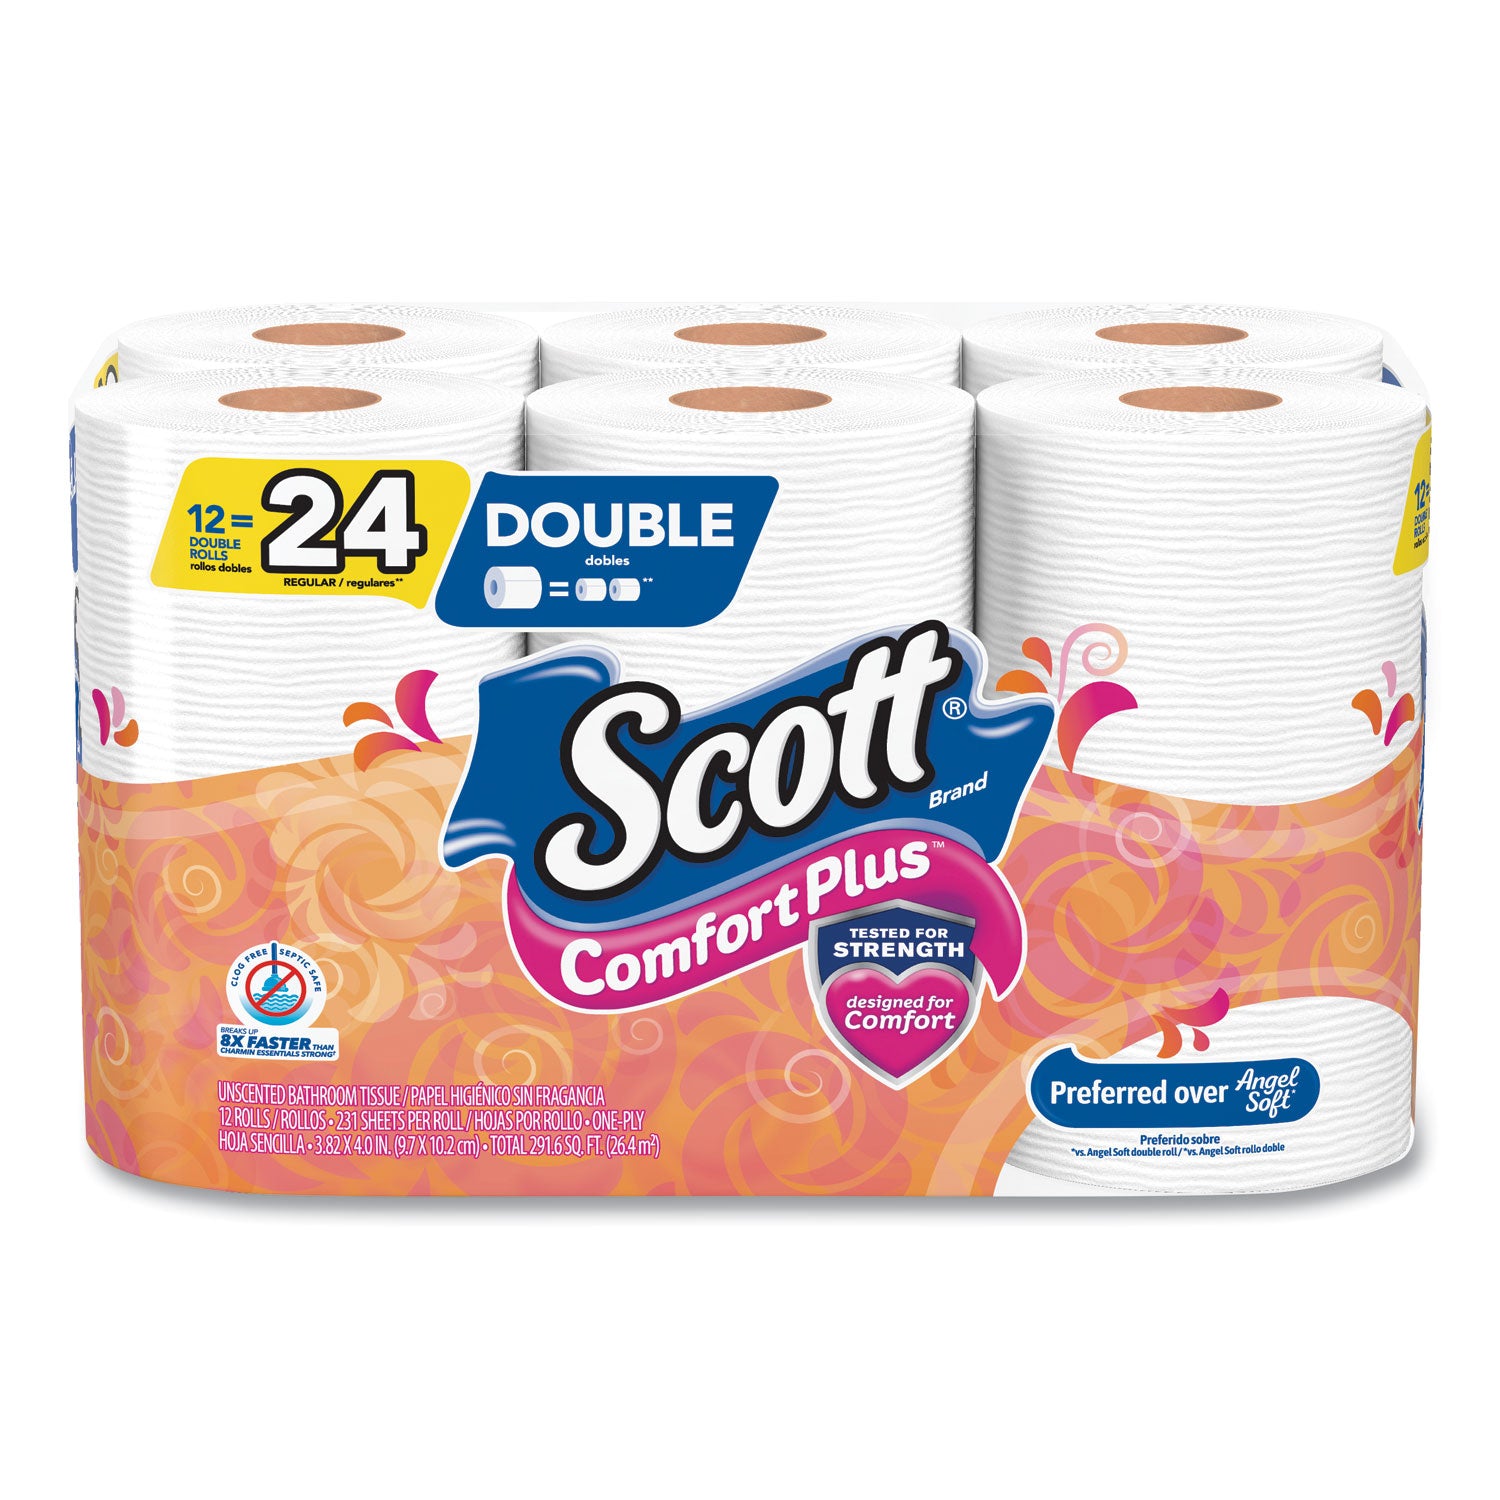 comfortplus-toilet-paper-double-roll-bath-tissue-septic-safe-1-ply-white-231-sheets-roll-12-rolls-pack-4-packs-carton_kcc47618 - 1